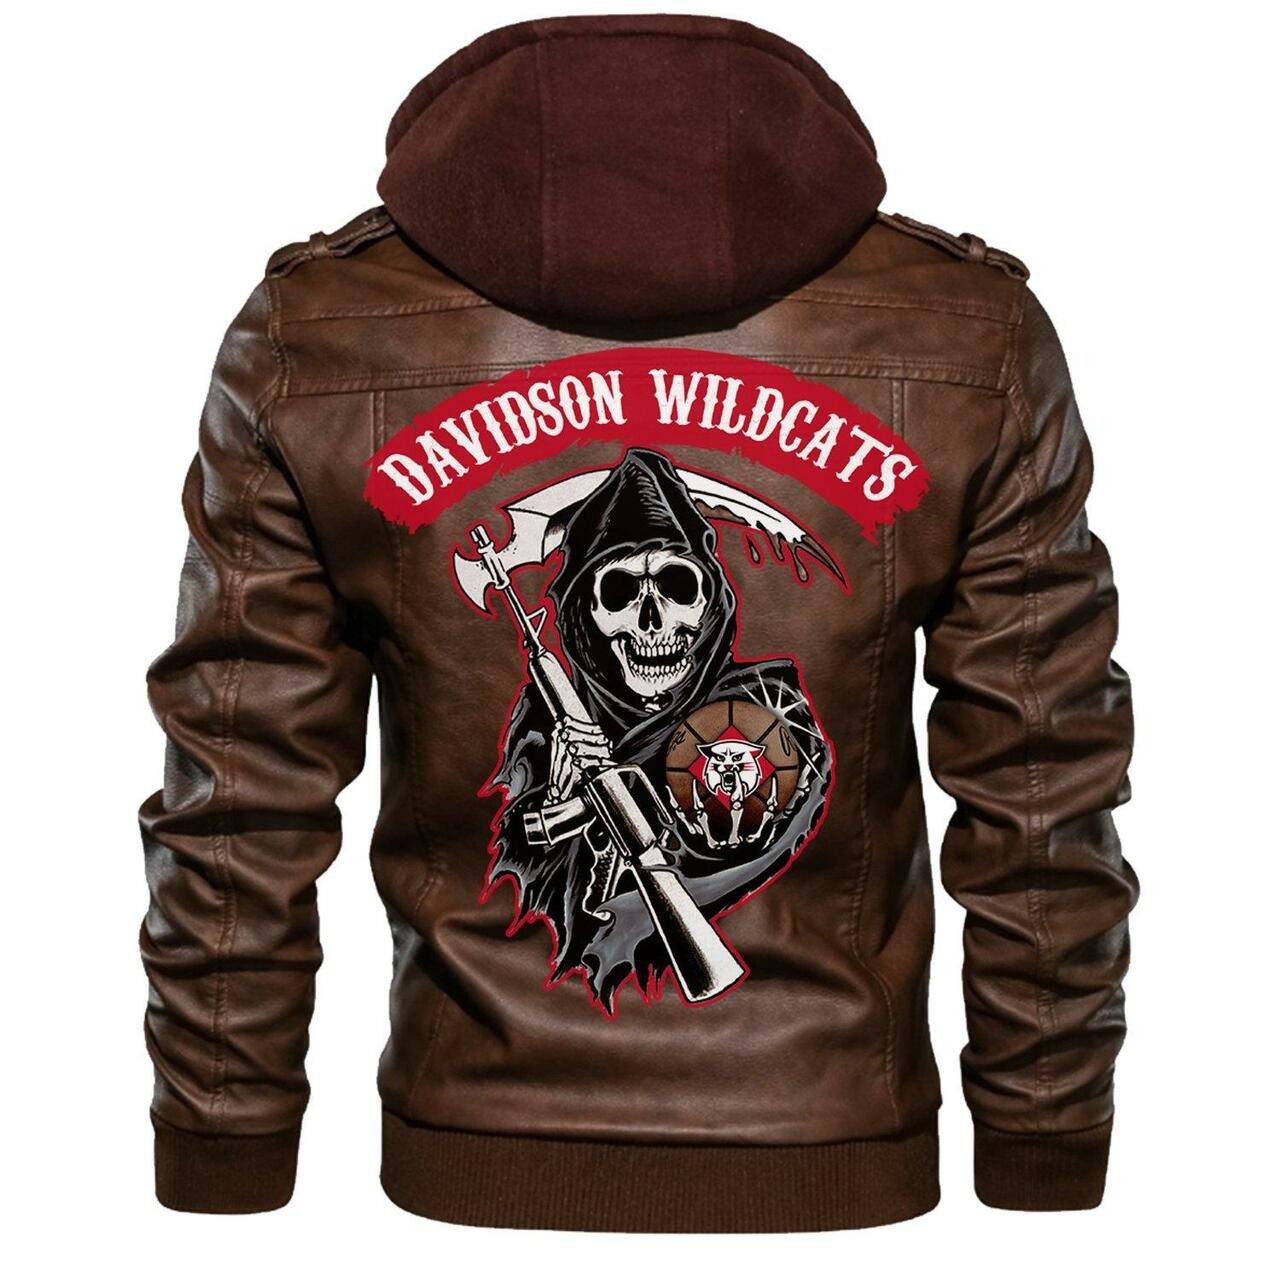 Don't wait another minute, Get Hot Leather Jacket today 73